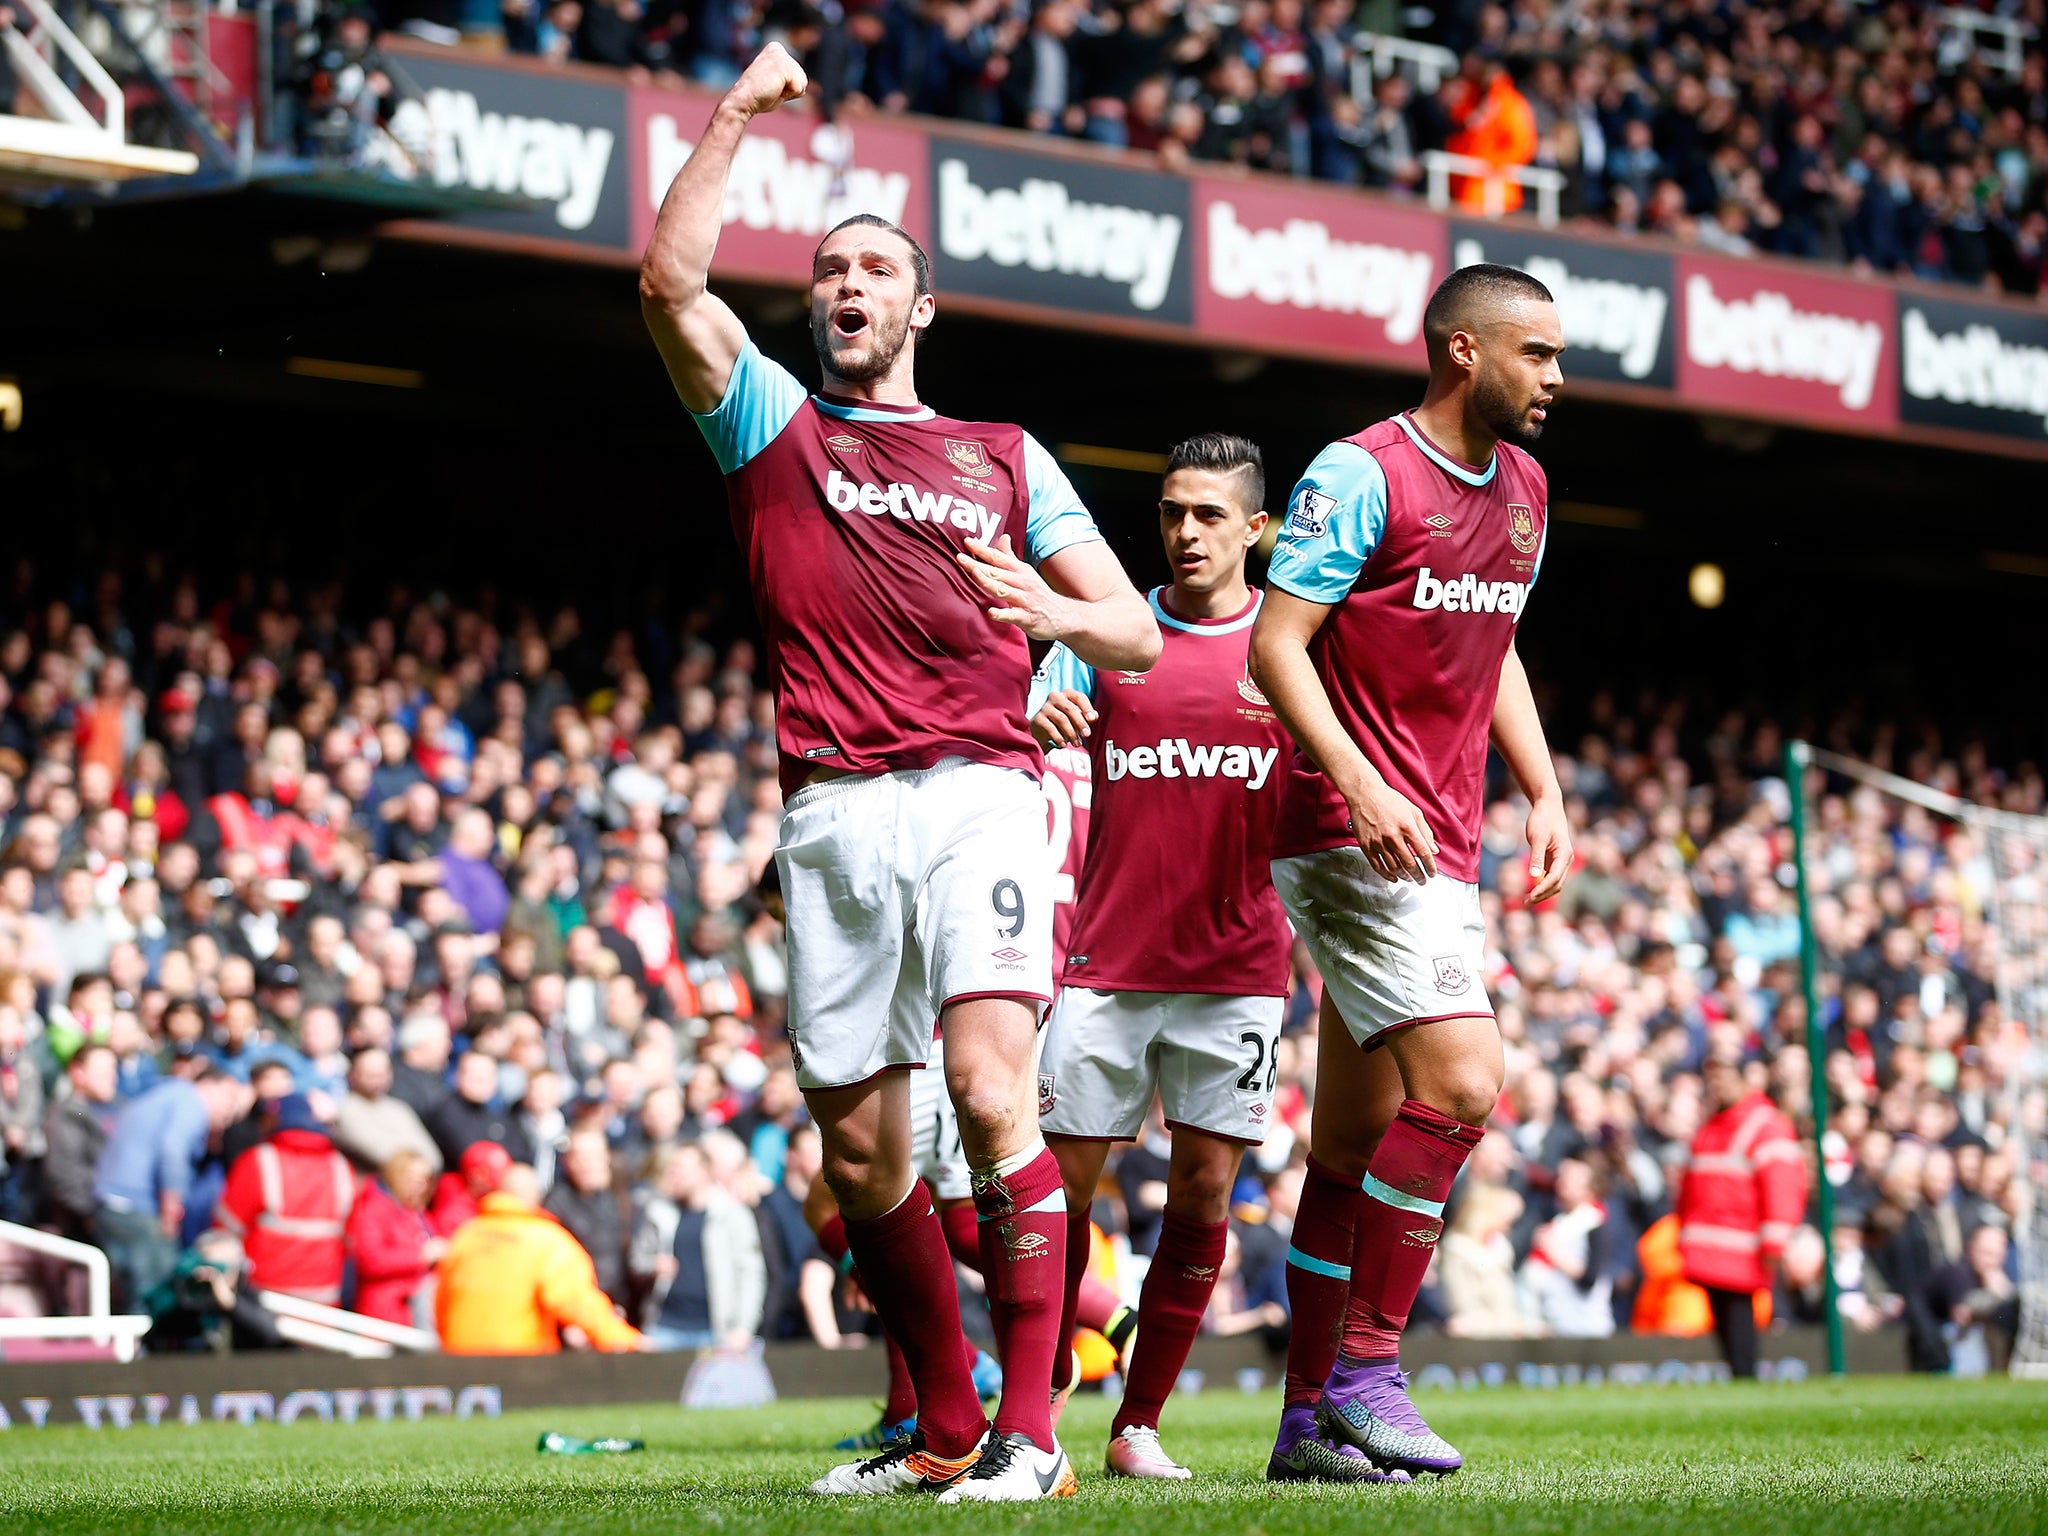 Andy Carroll scored a hat-trick in West Ham's 3-3 draw with Arsenal on Saturday